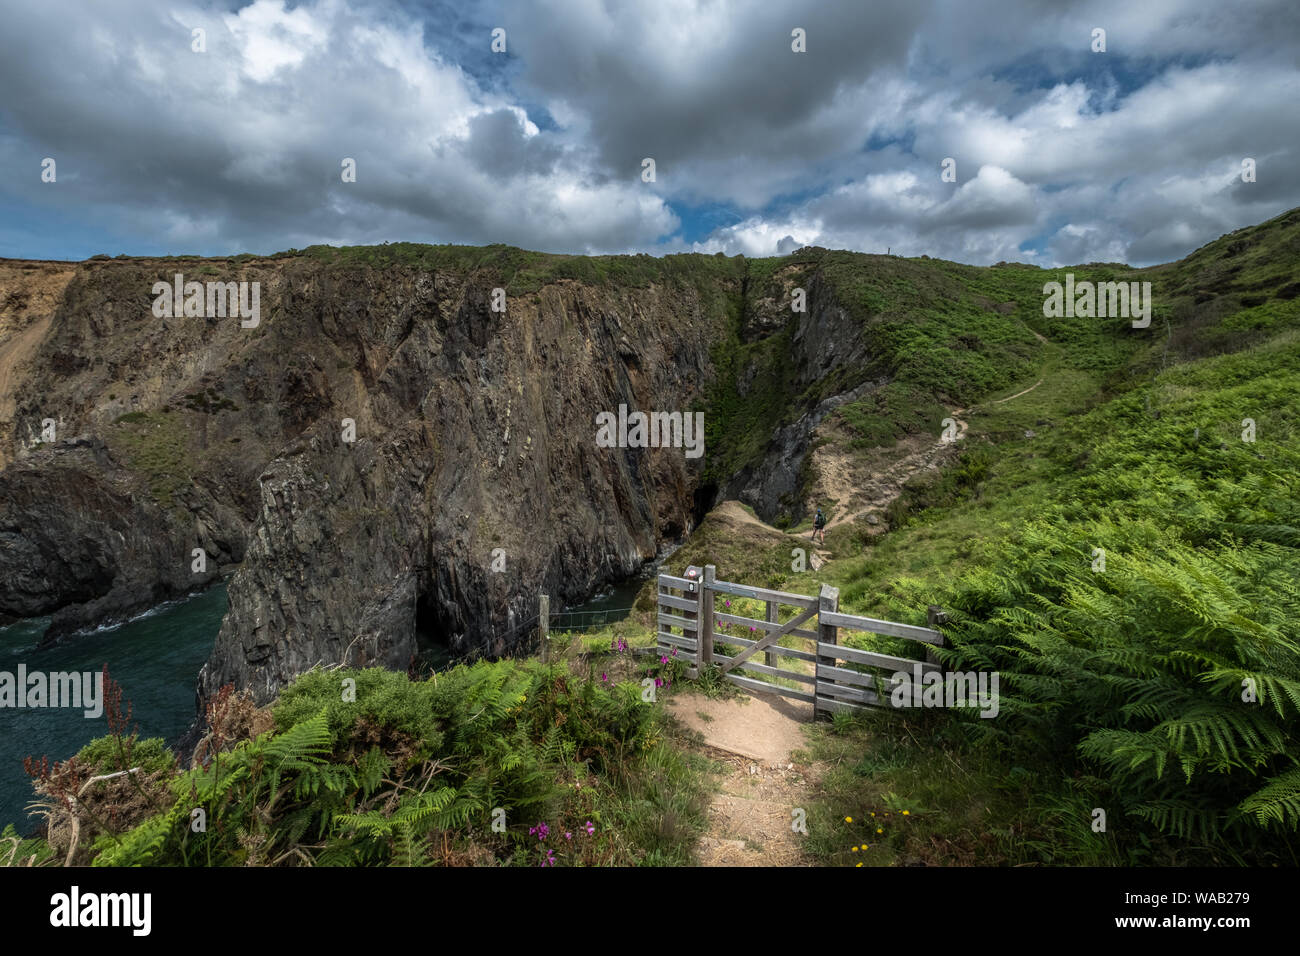 Coastal views, cliffs, luscious green ferns and a wooden gate on the Pembrokeshire Coast Path, Wales Stock Photo